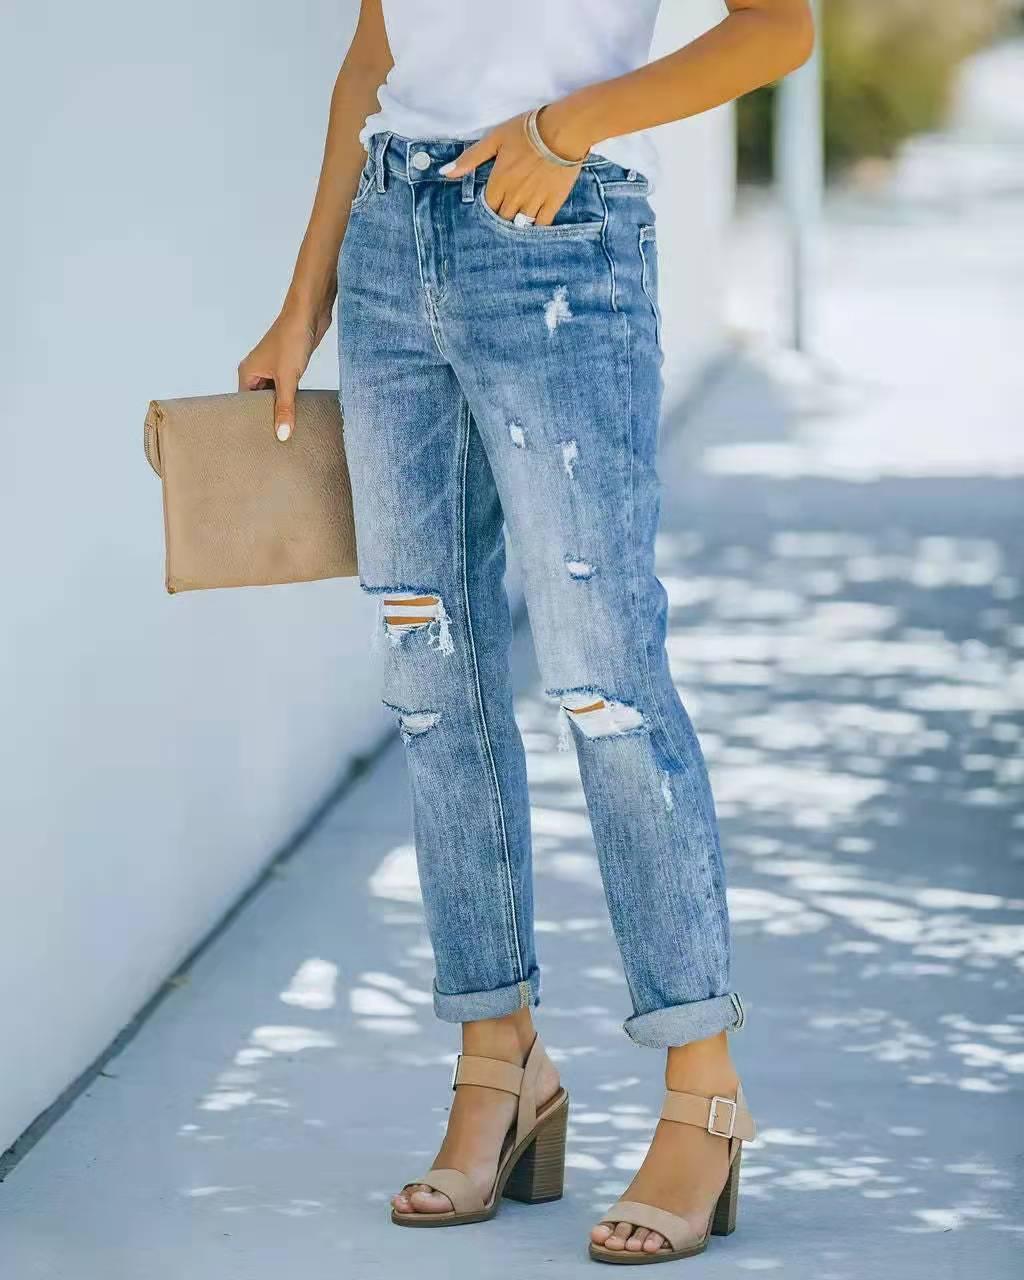 Europe American Trend Ripped Jeans Trousers Blue